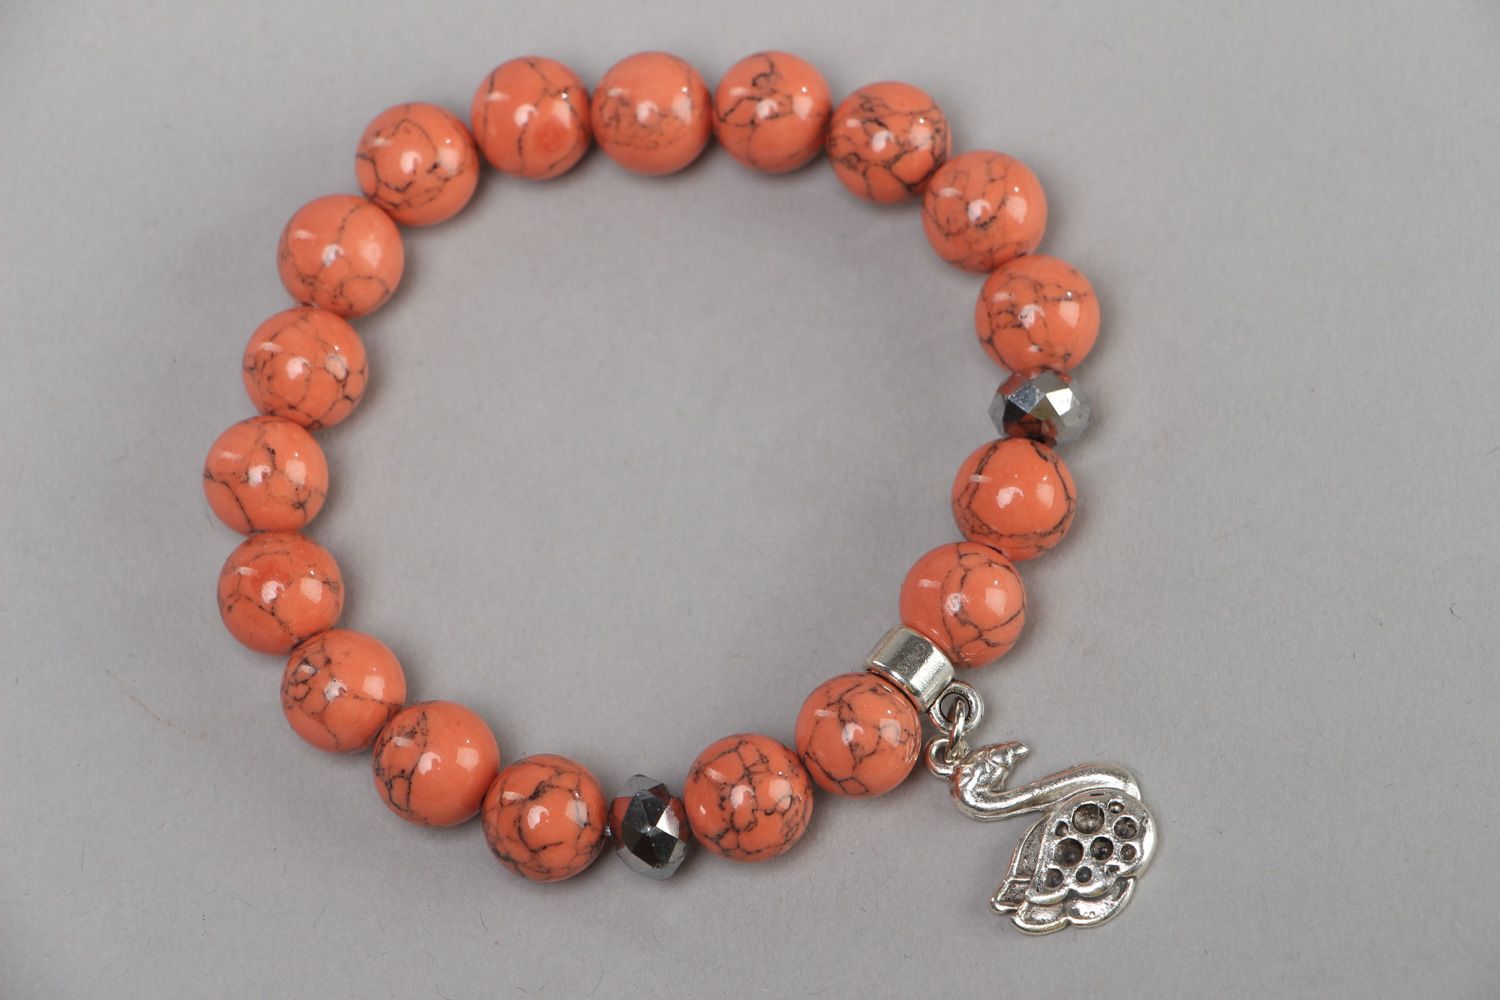 Handmade coral bracelet with metal charm in one turn photo 2